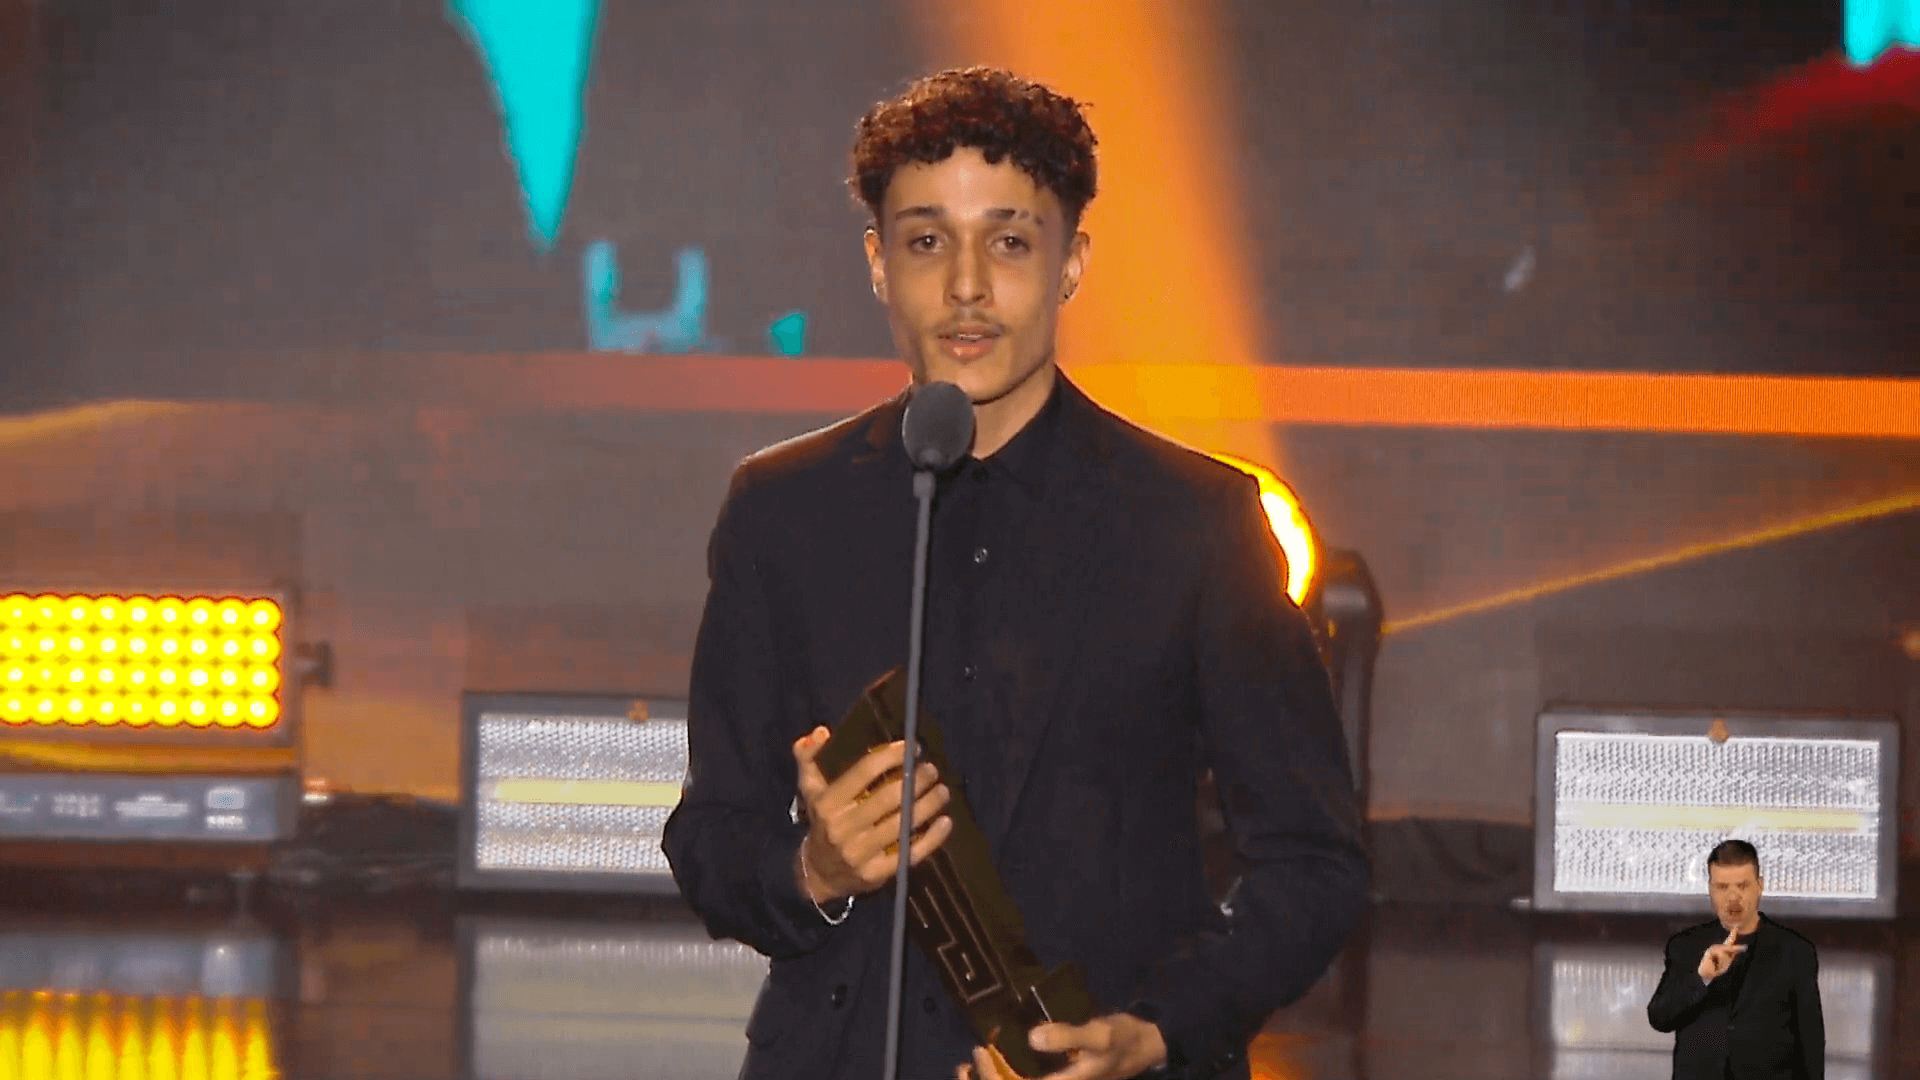 yüz is the Fighting Game Player of the Year in Brazil